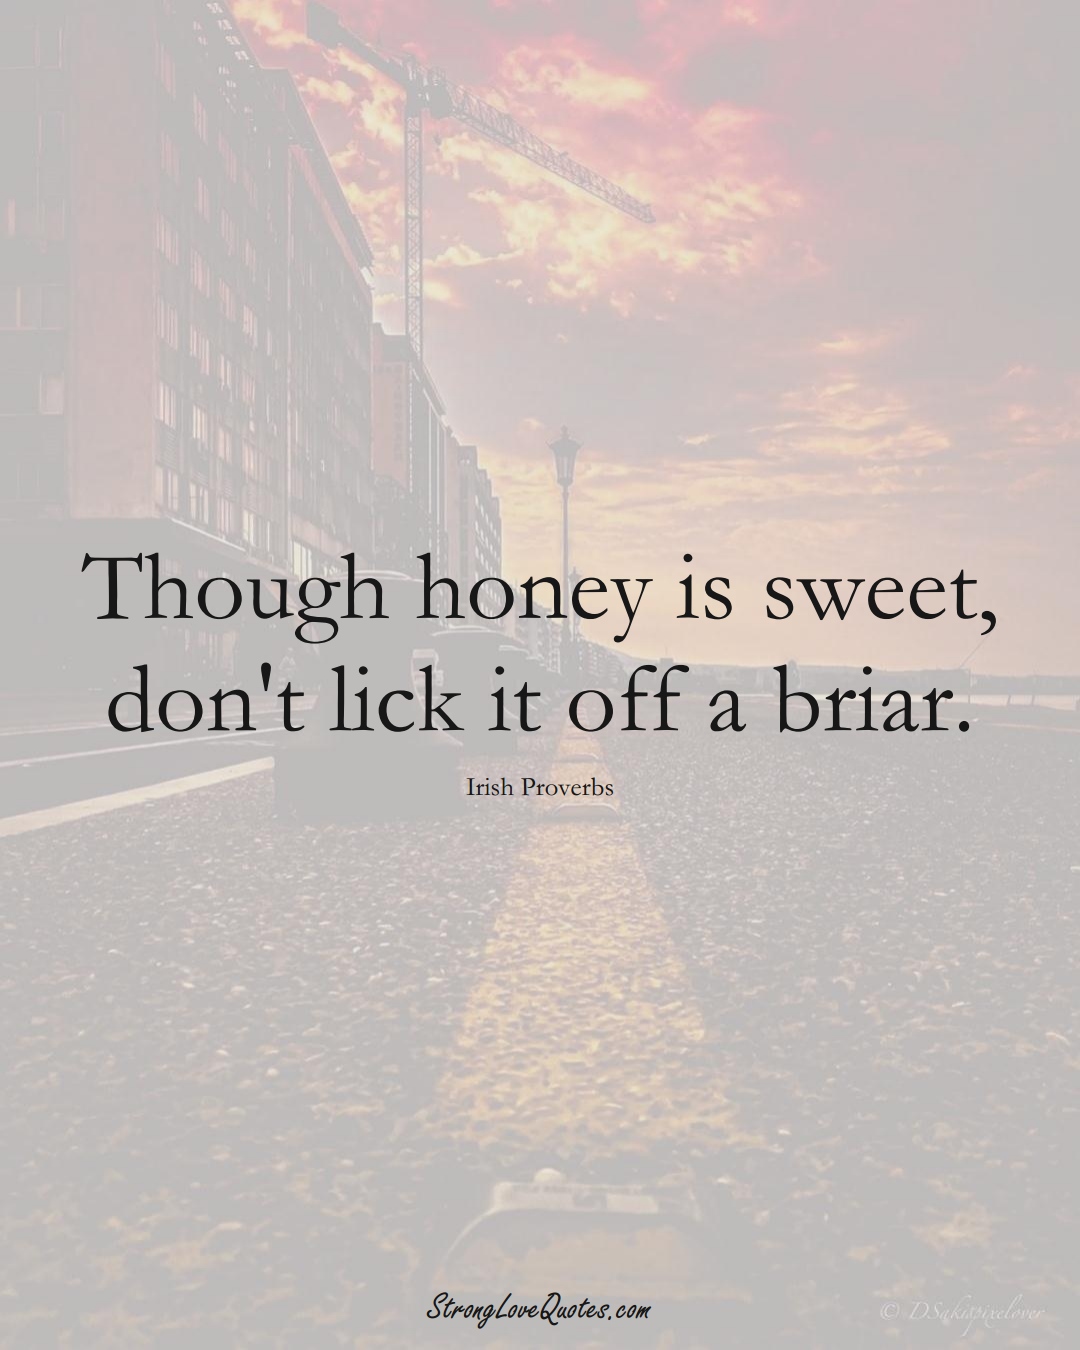 Though honey is sweet, don't lick it off a briar. (Irish Sayings);  #EuropeanSayings